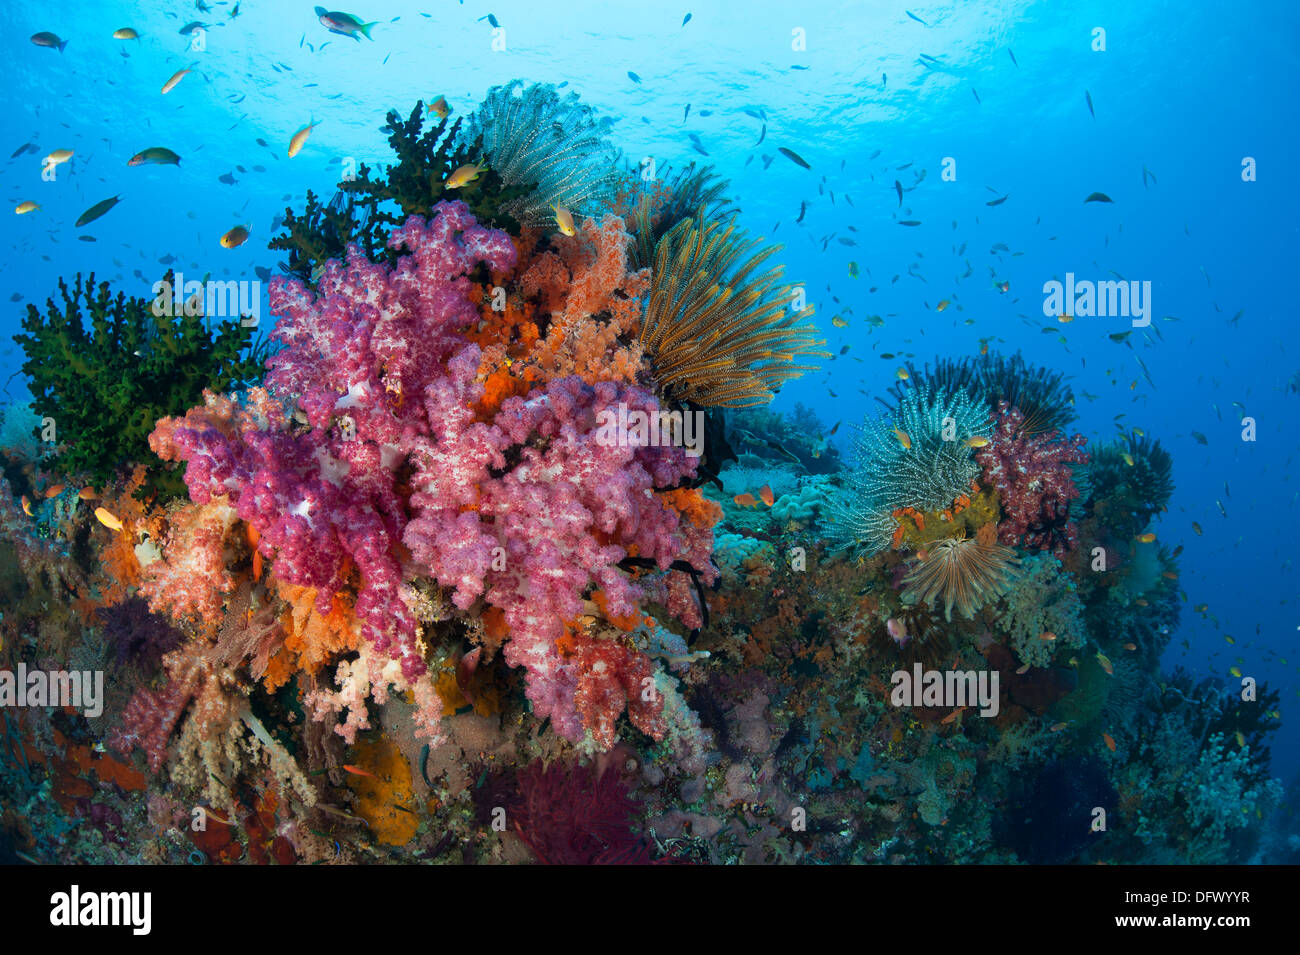 Colorful soft corals (Dendronephthya sp.) adorn the stunning reefs of southern Raja Ampat, West Papua, Indonesia. Stock Photo